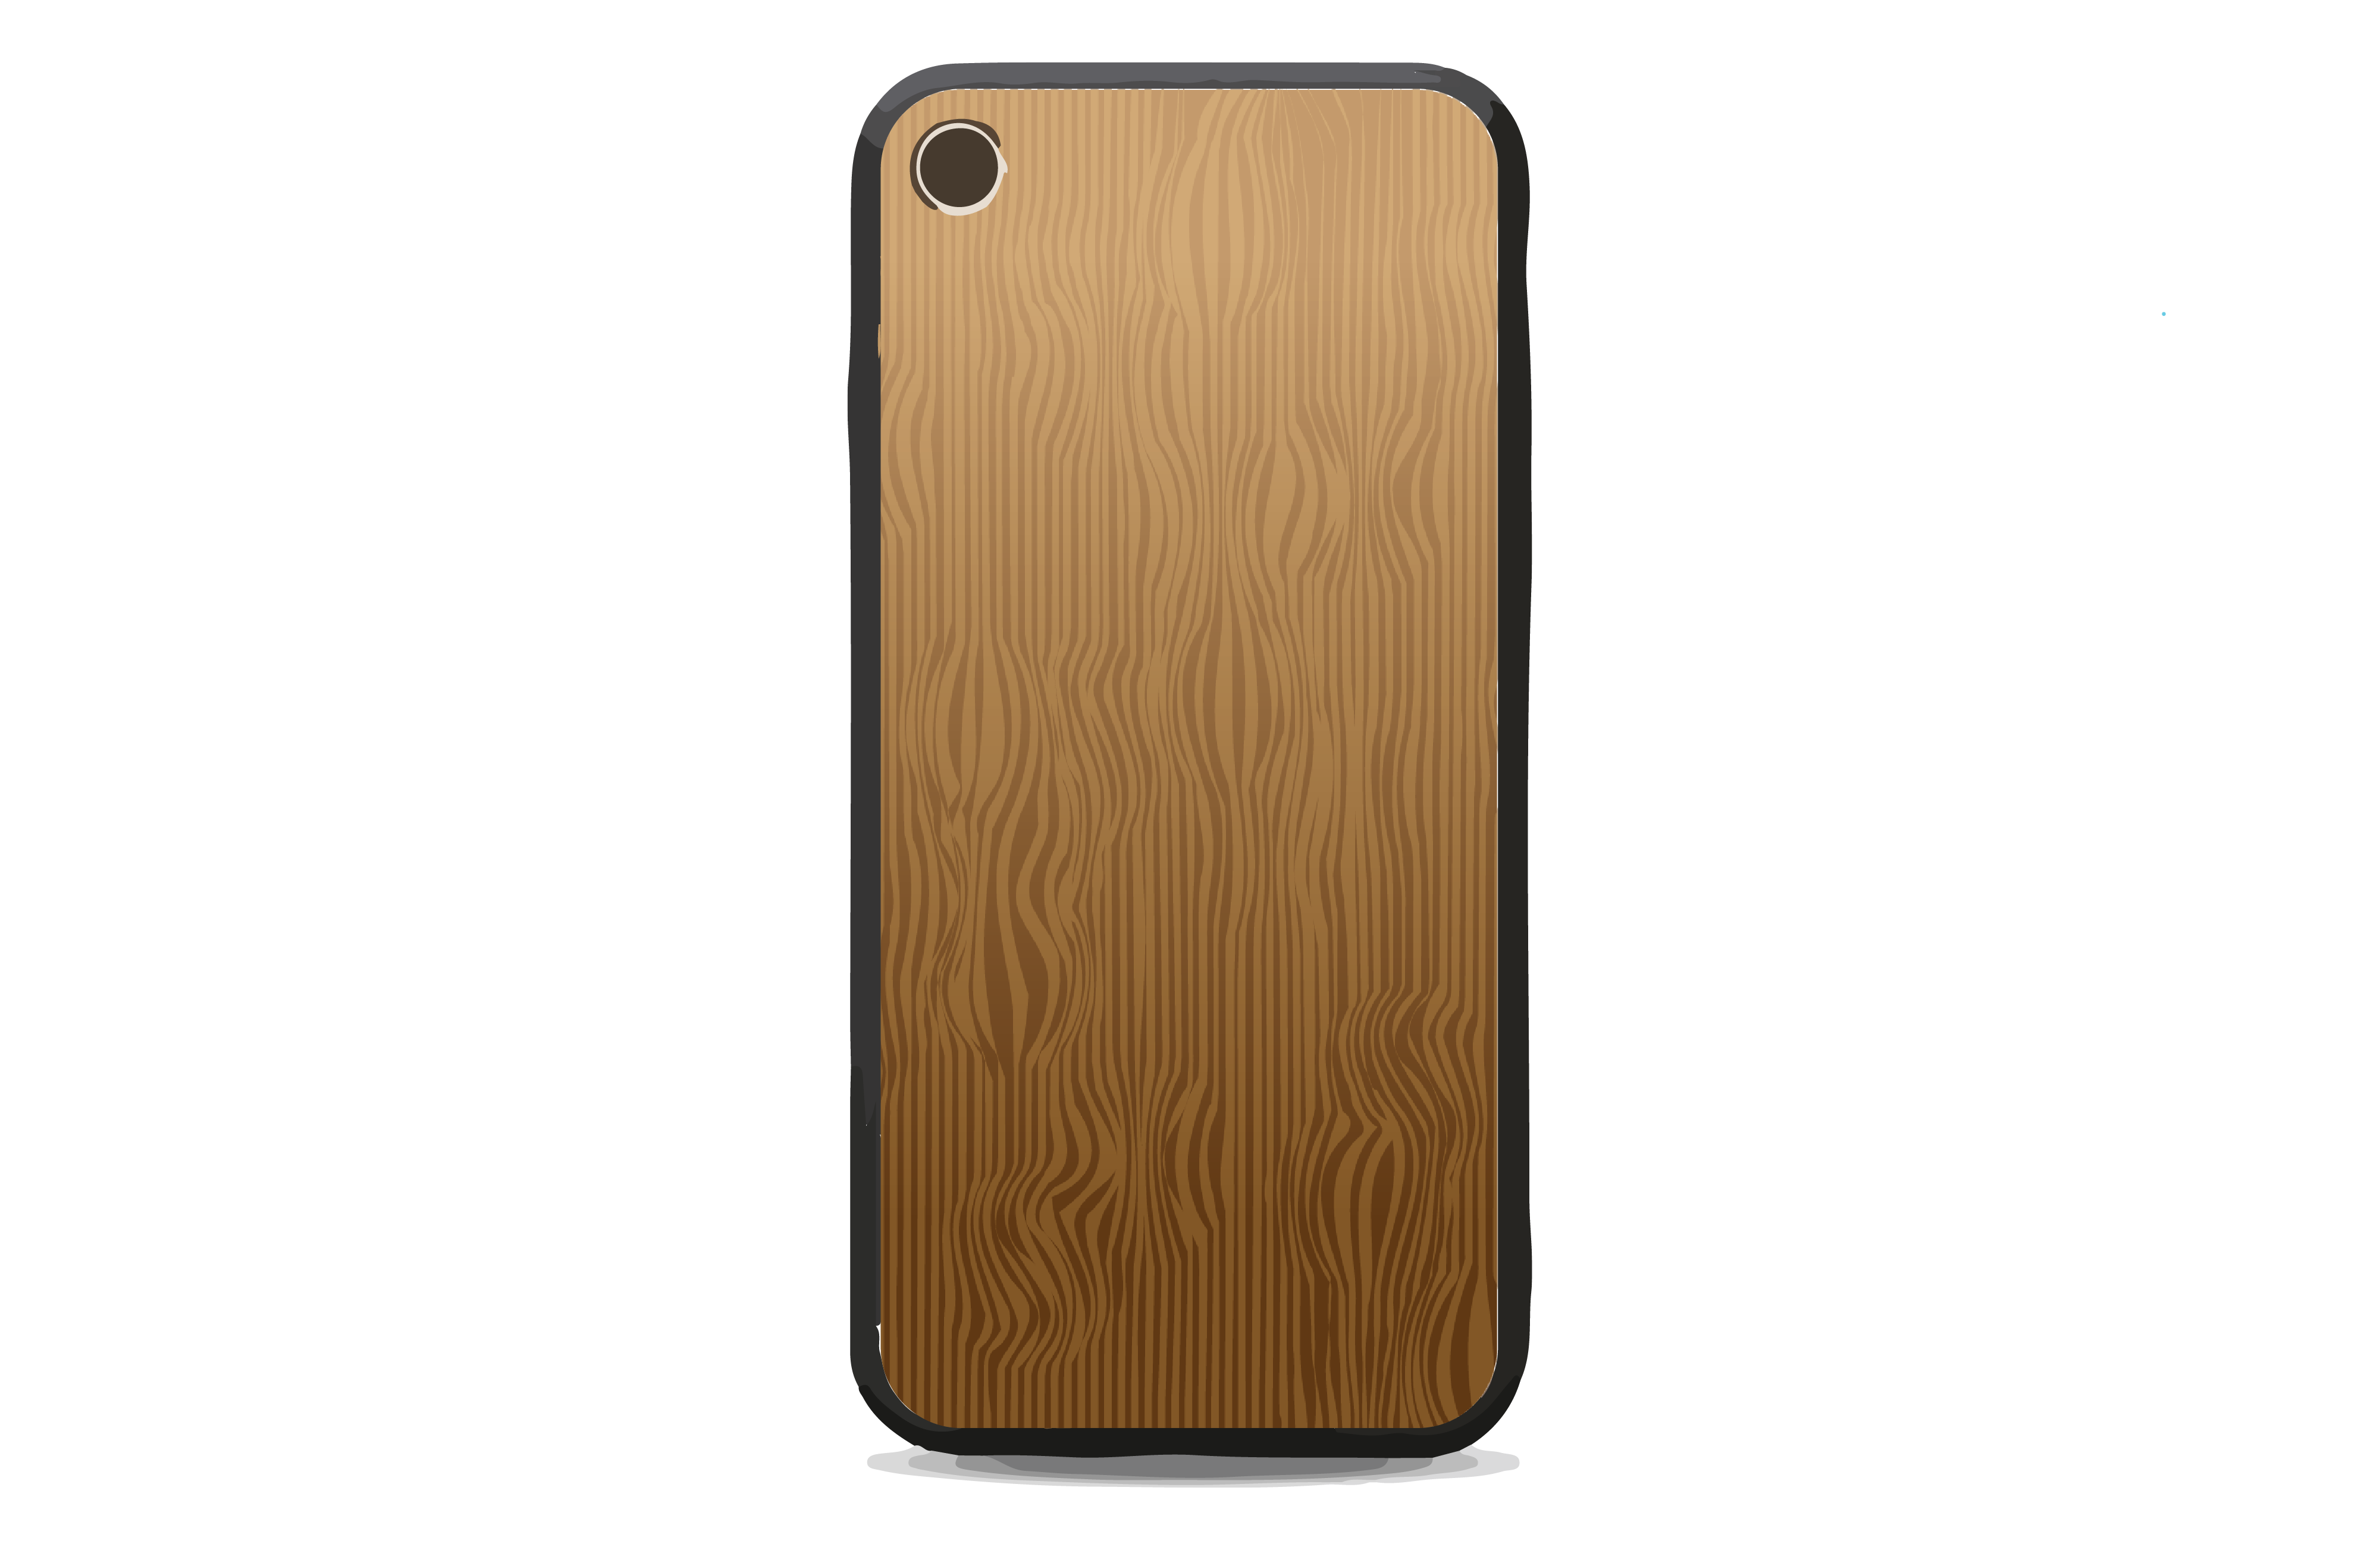 A cell phone case cover that looks like it is made of wood because it is brown with a wood grain pattern on the surface.